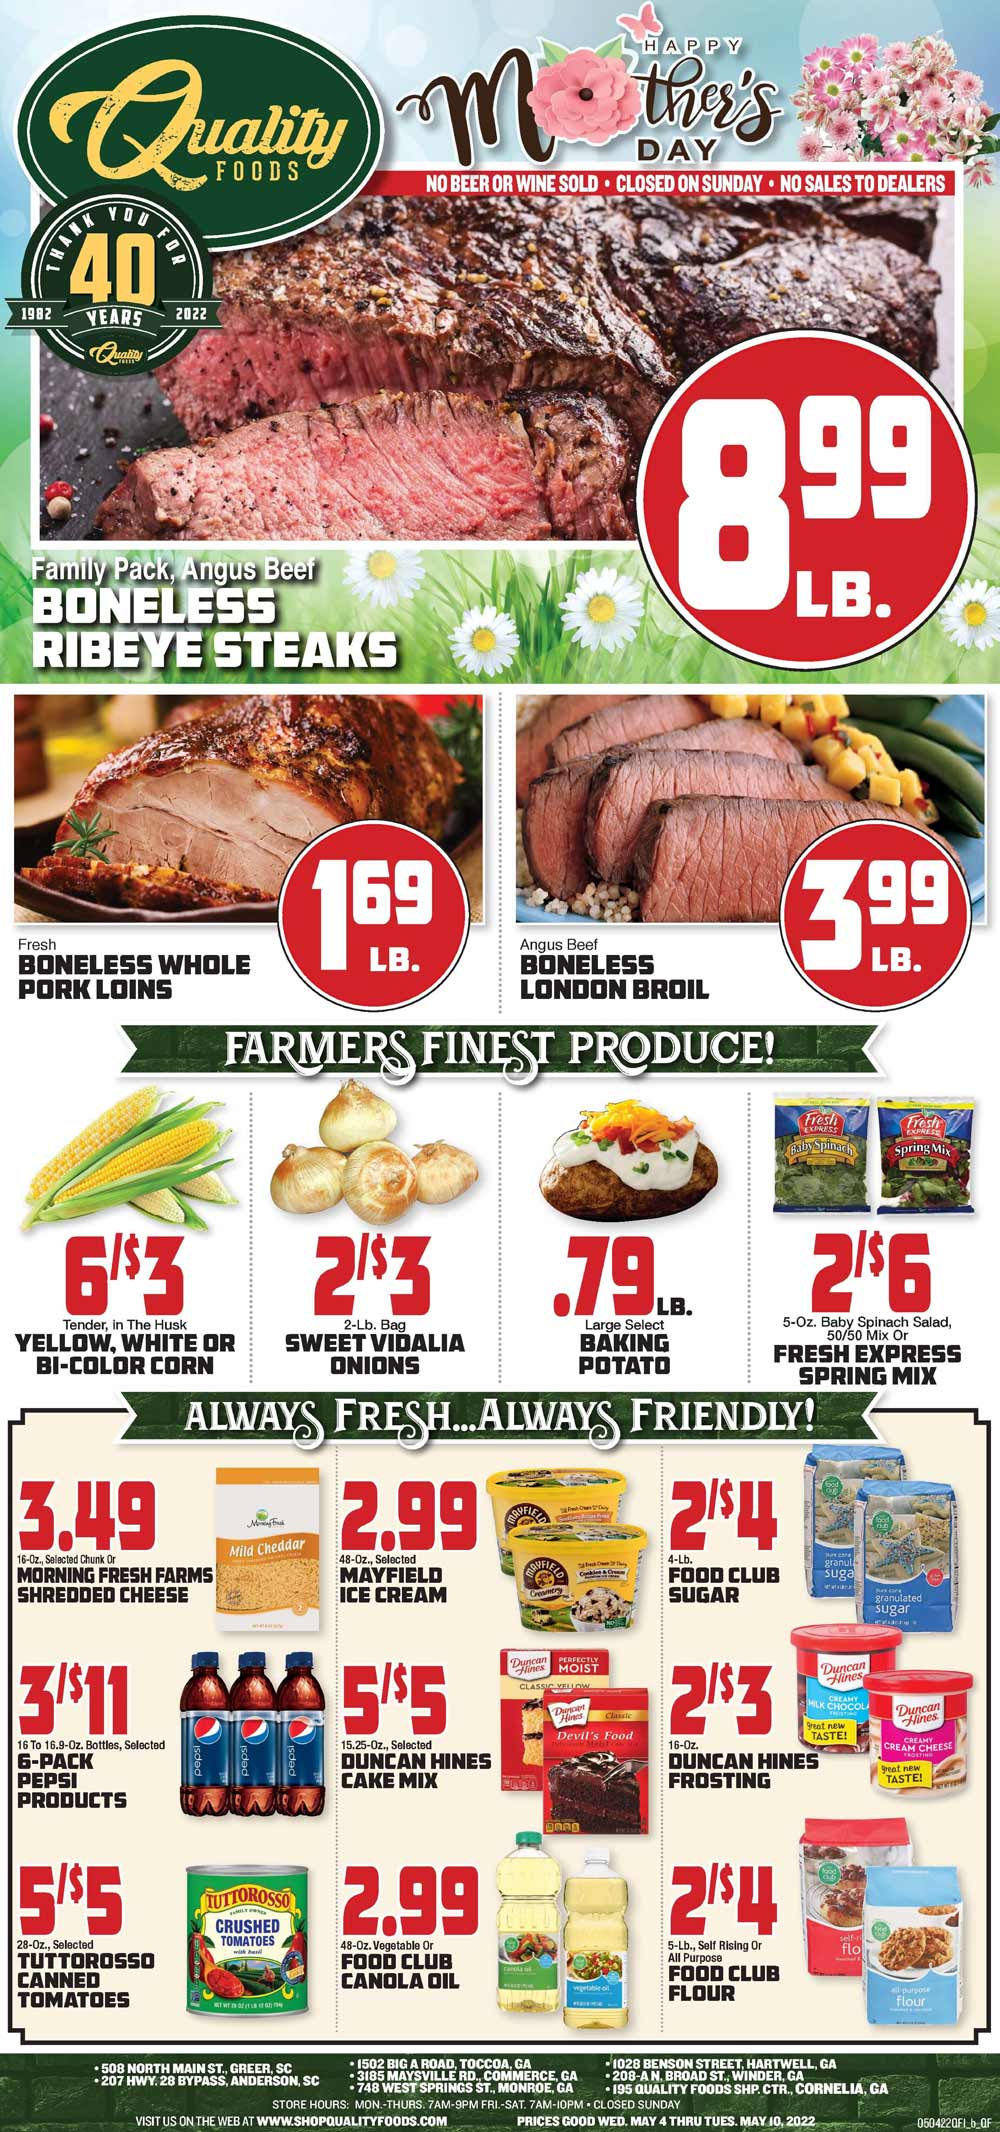 Quality Foods Weekly Ad (5/04/22 - 5/10/22)